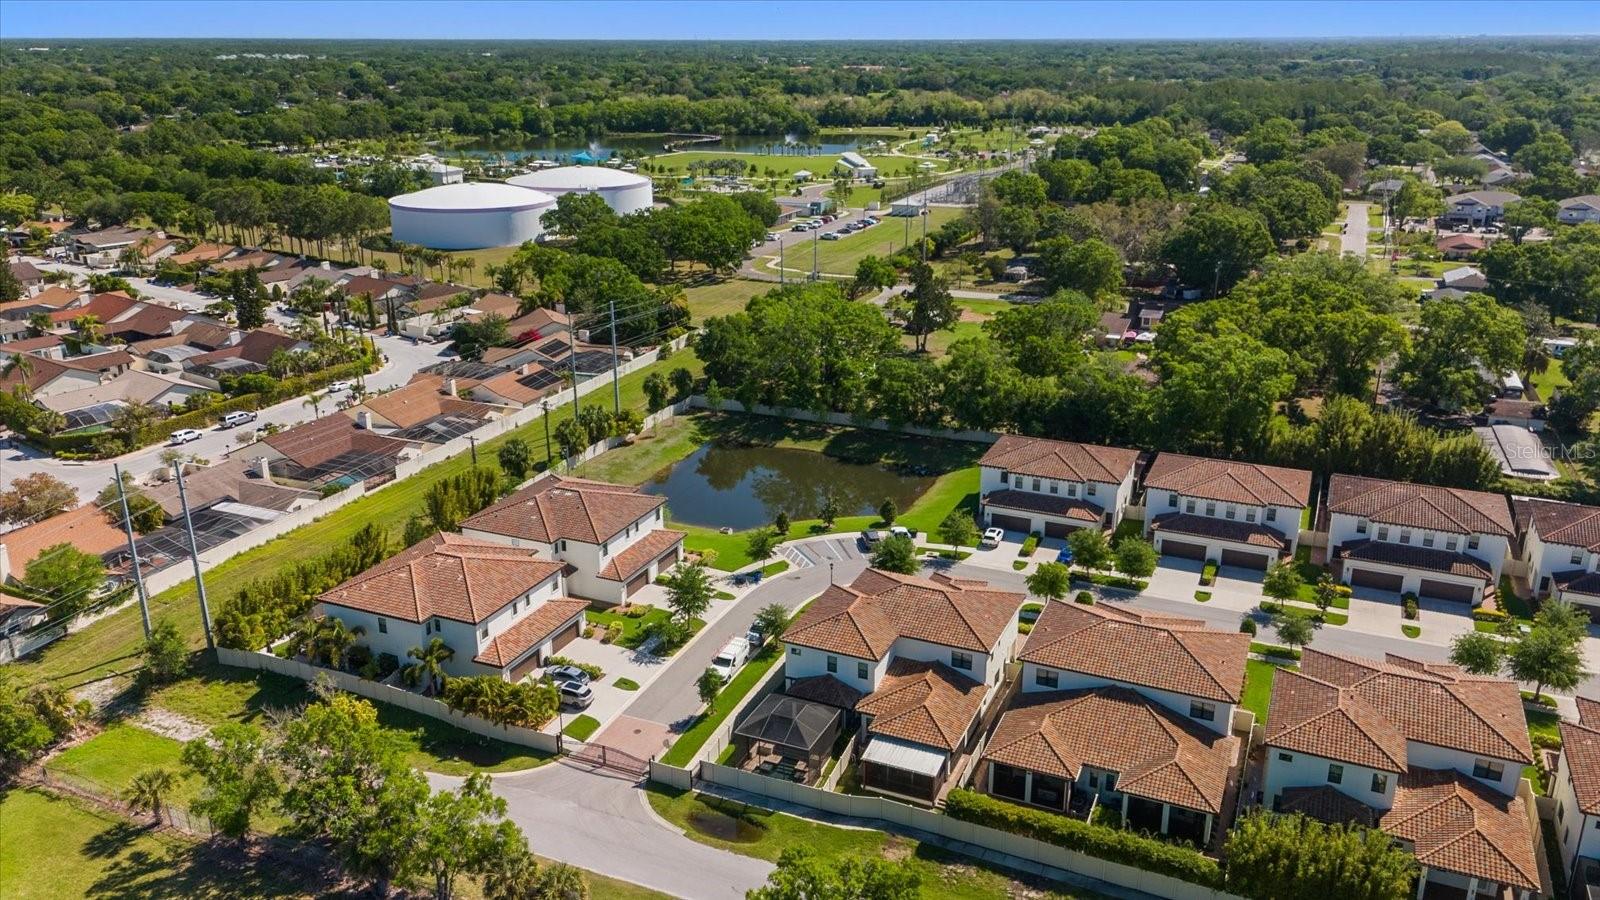 The Sanctuary at Carrollwood Village Aerial View with the Carrollwood Village Park in the Background